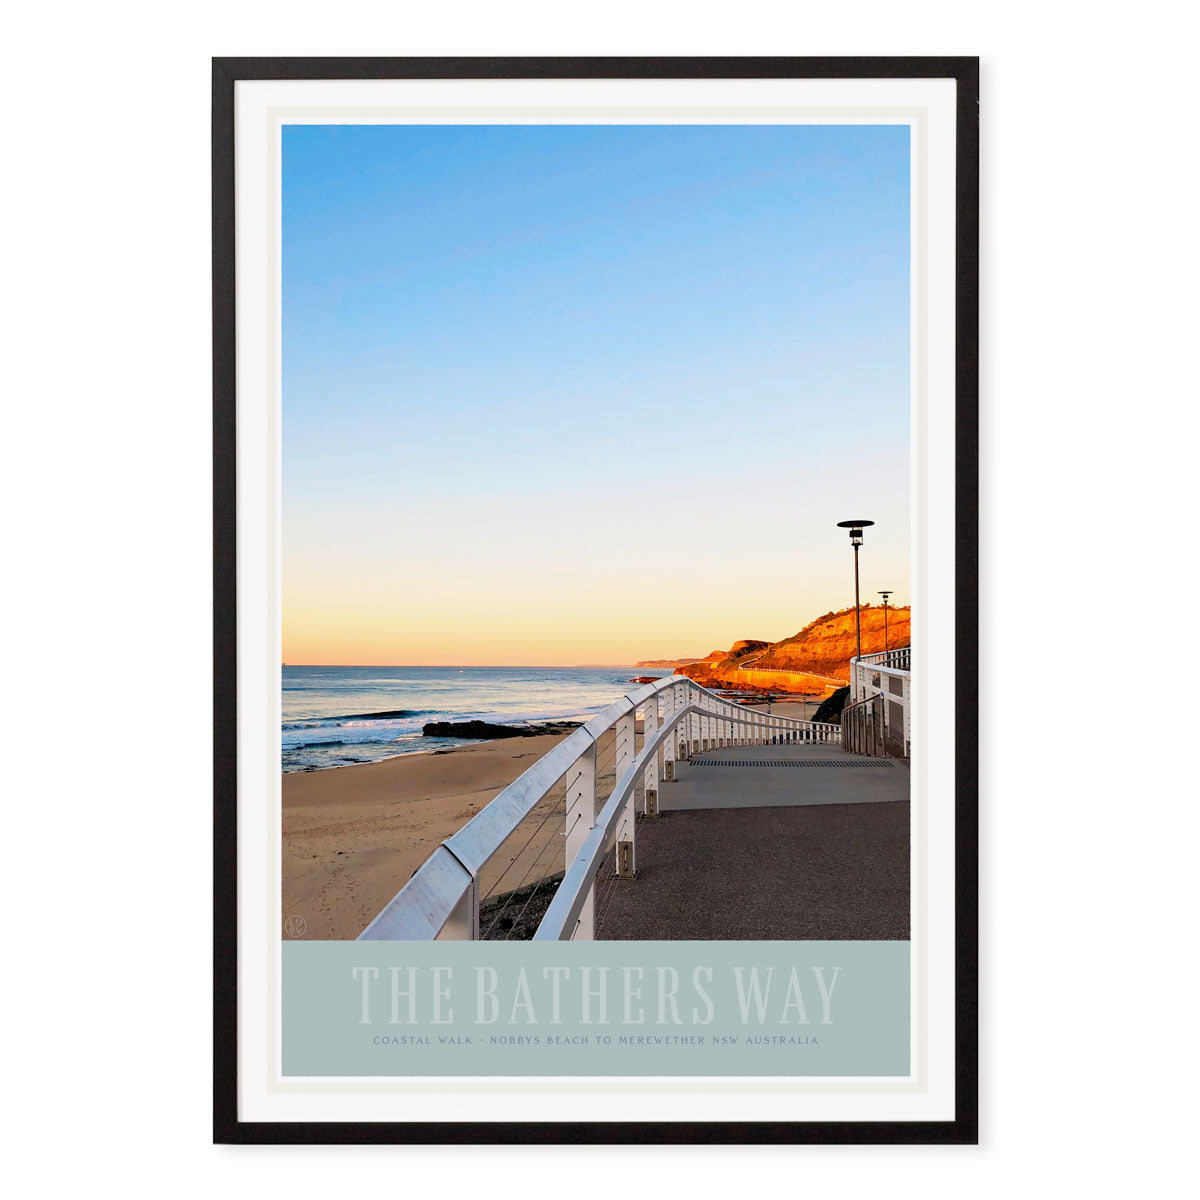 The Bathers Way Newcastle vintage retro poster print in black frame from Places We Luvpr